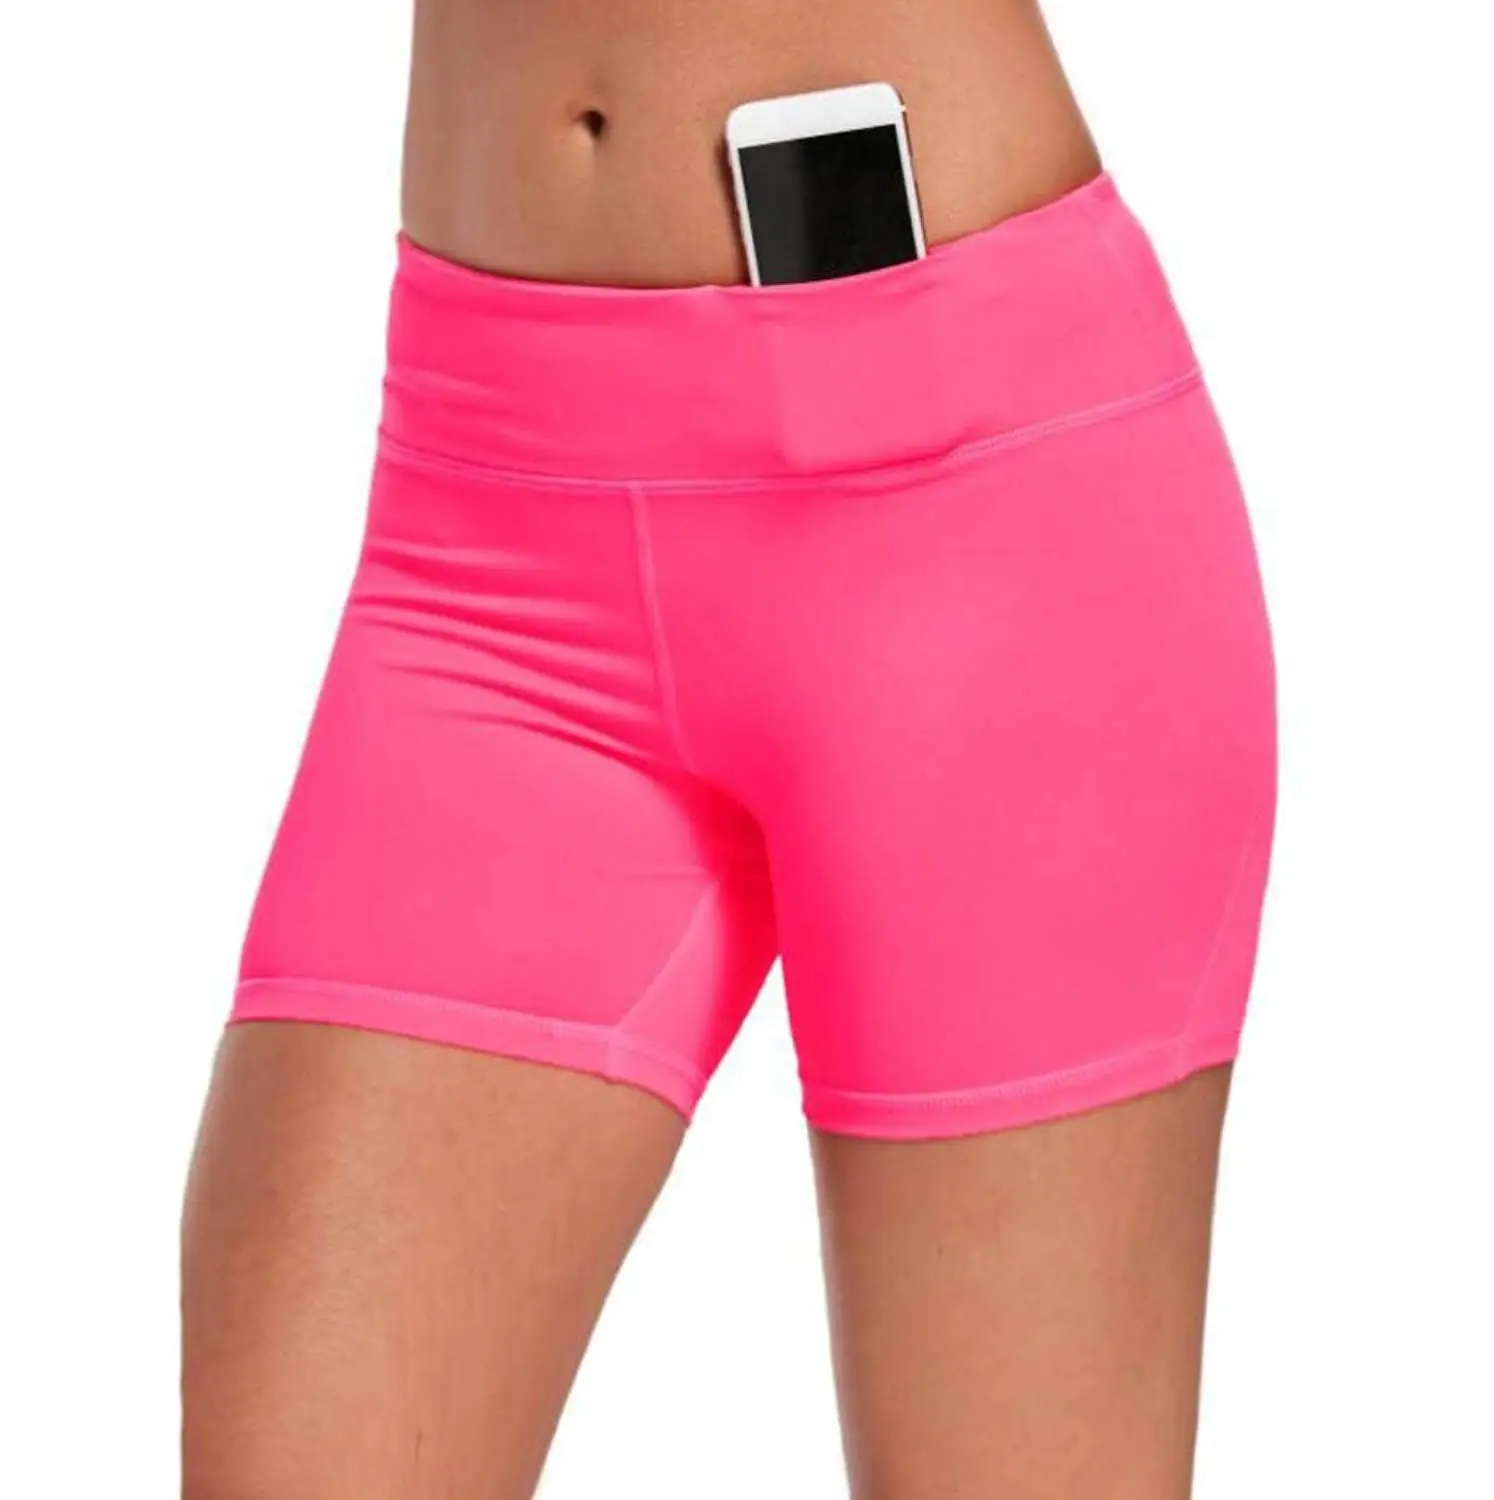 Download Cheap Ladies Sports Shorts, find Ladies Sports Shorts ...